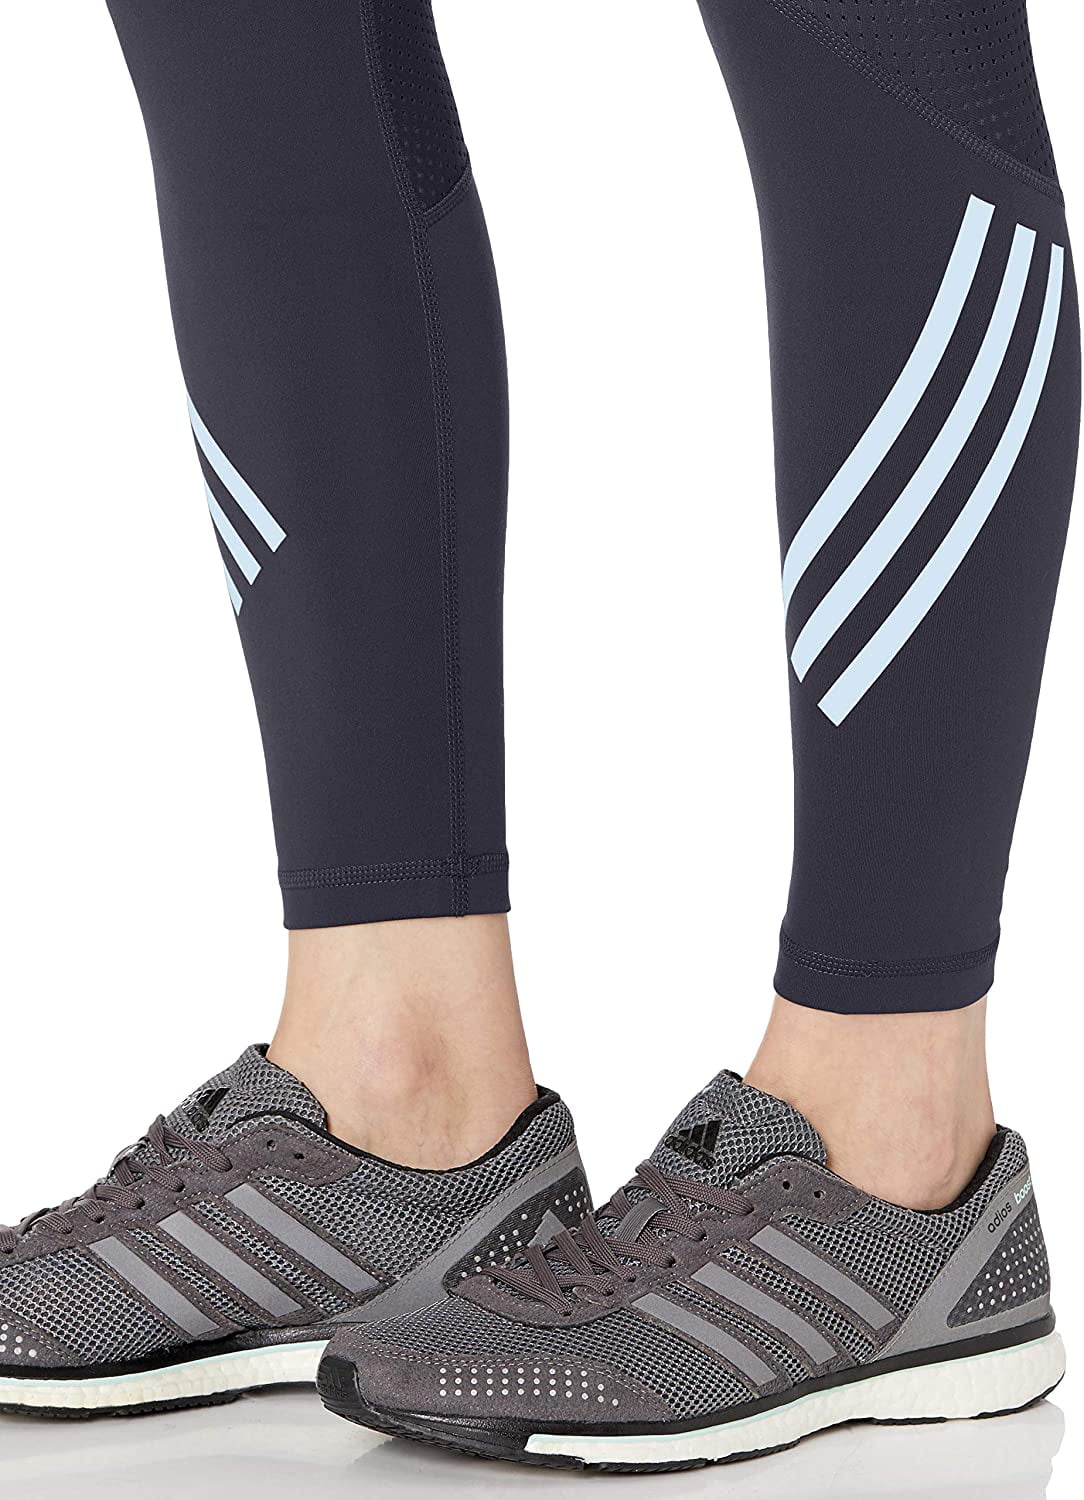 Adidas Womens Believe This High-Rise Training Leggings Color Legend Ink 